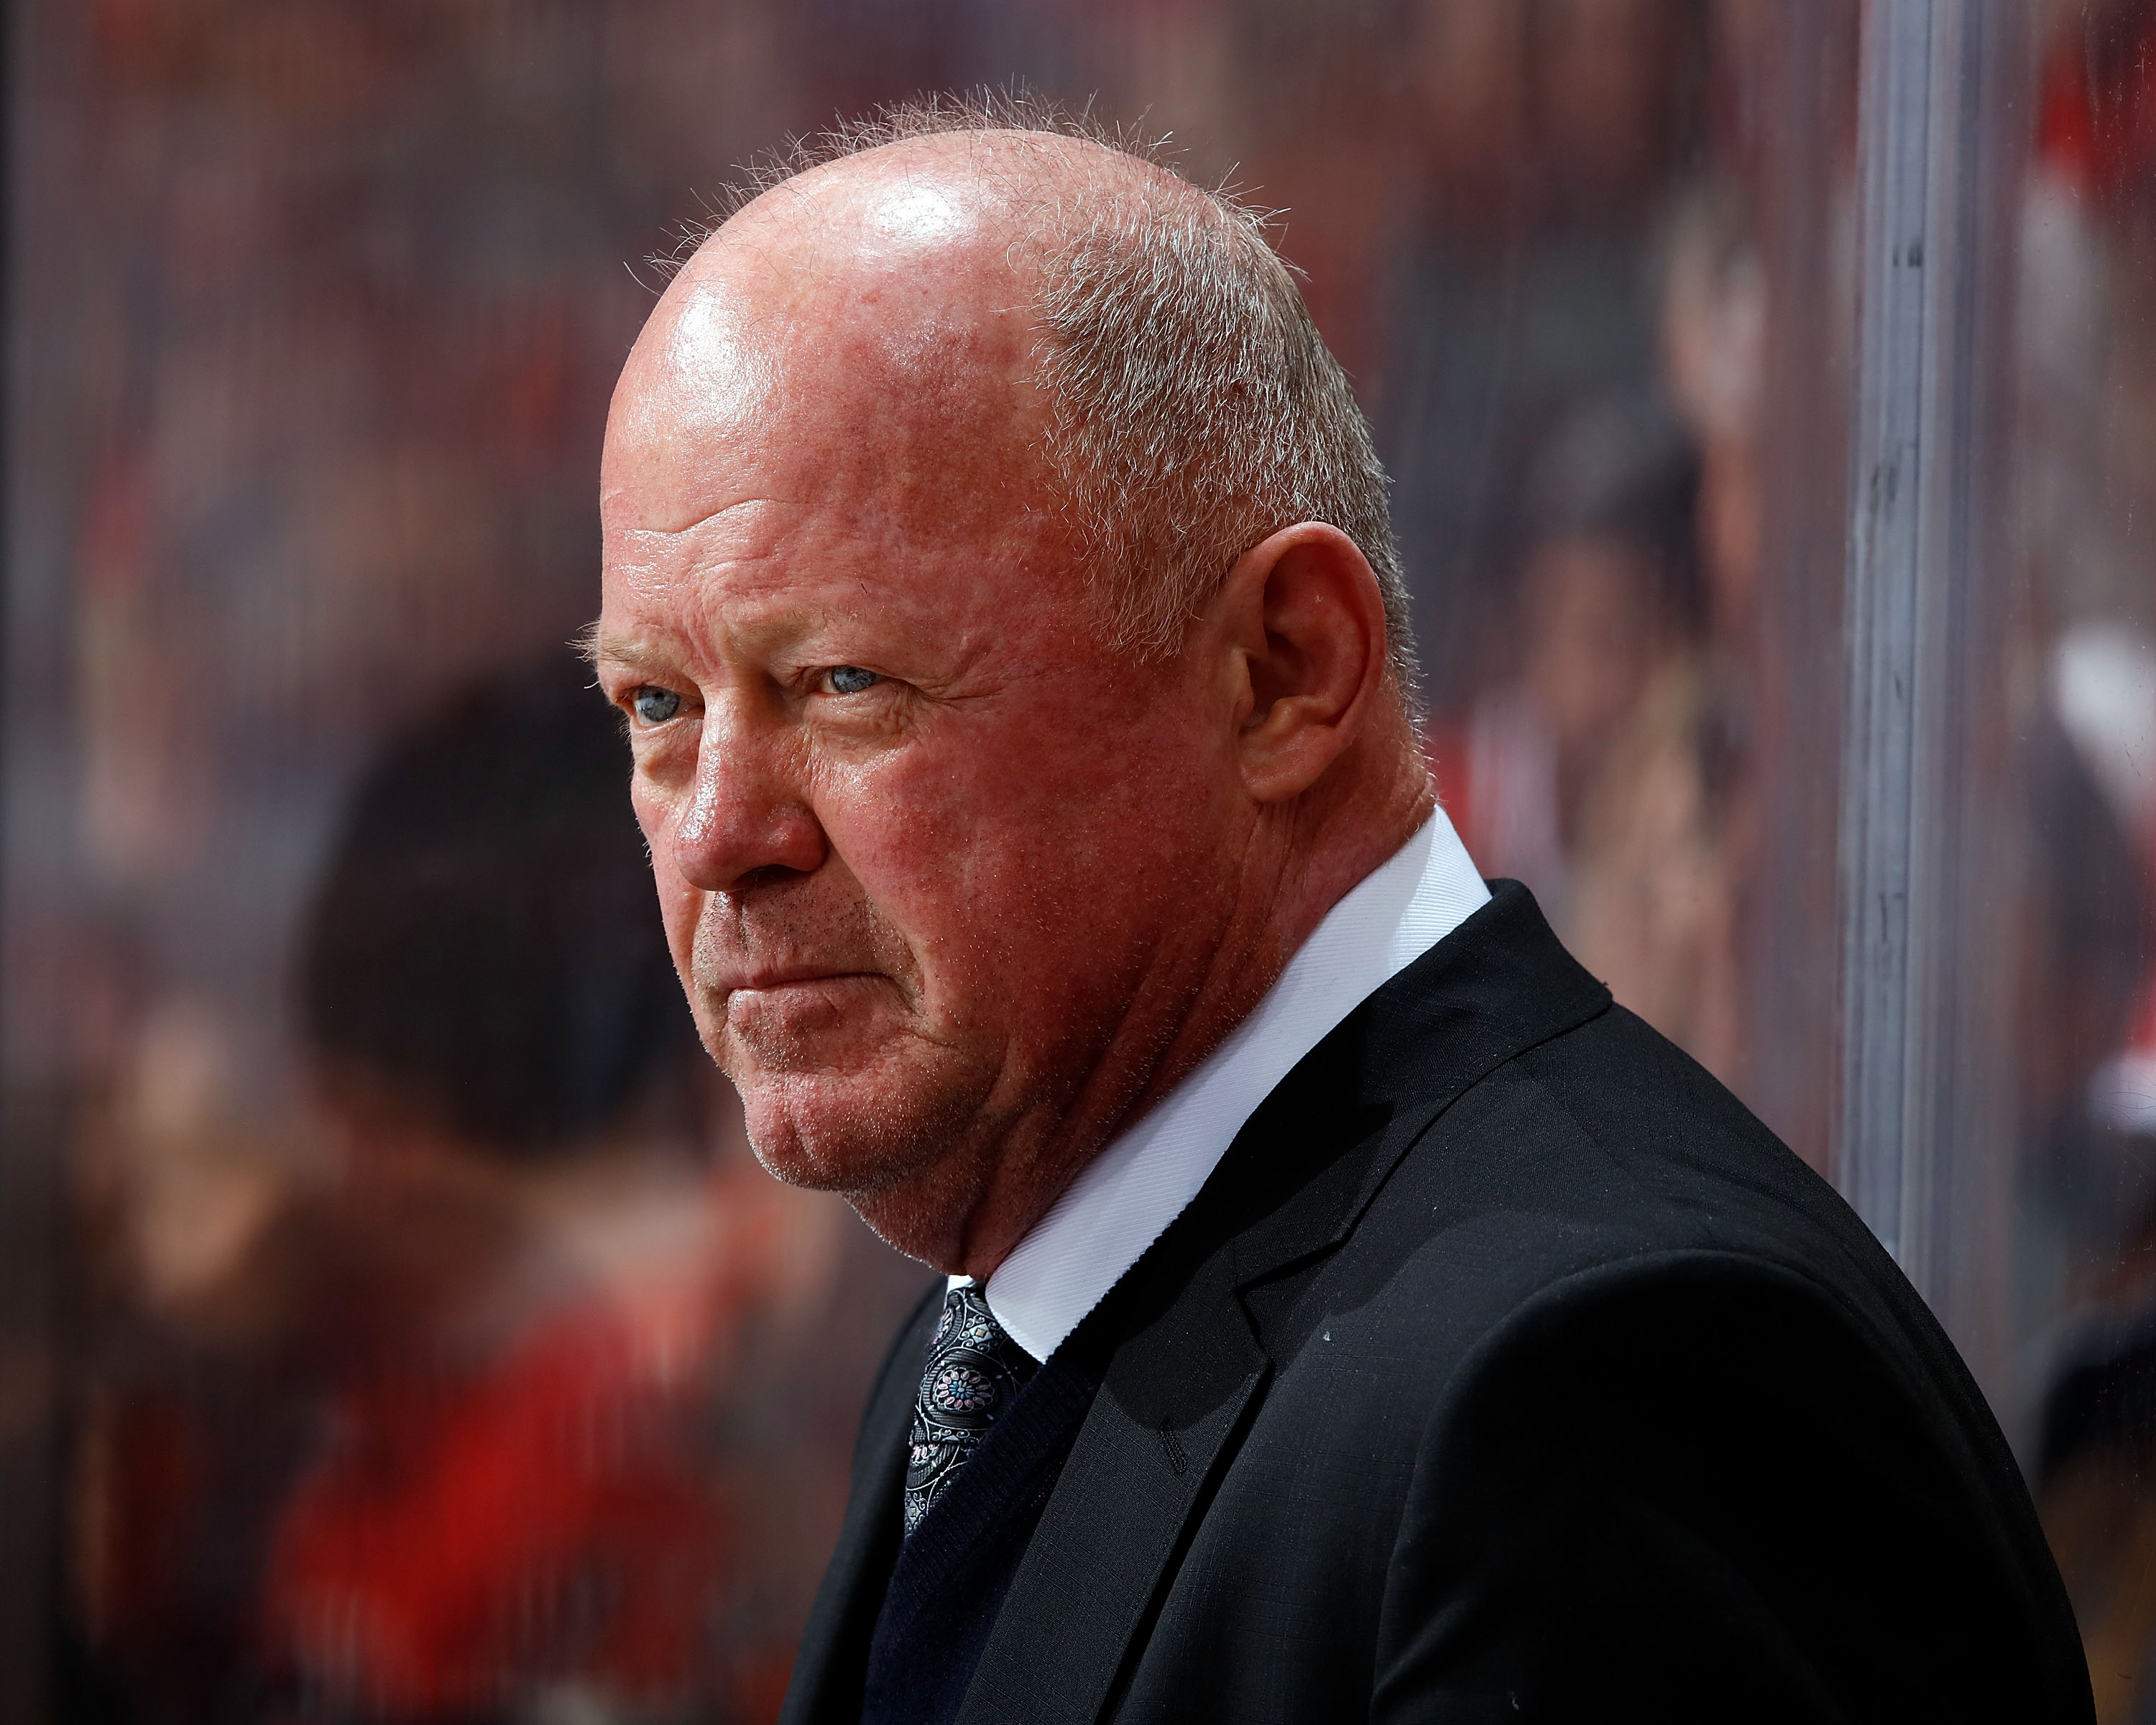 CALGARY, AB - FEBRUARY 22: Interim head coach of the Anaheim Ducks, Bob Murray watches his team during an NHL game against the Calgary Flames on February 22, 2019 at the Scotiabank Saddledome in Calgary, Alberta, Canada.